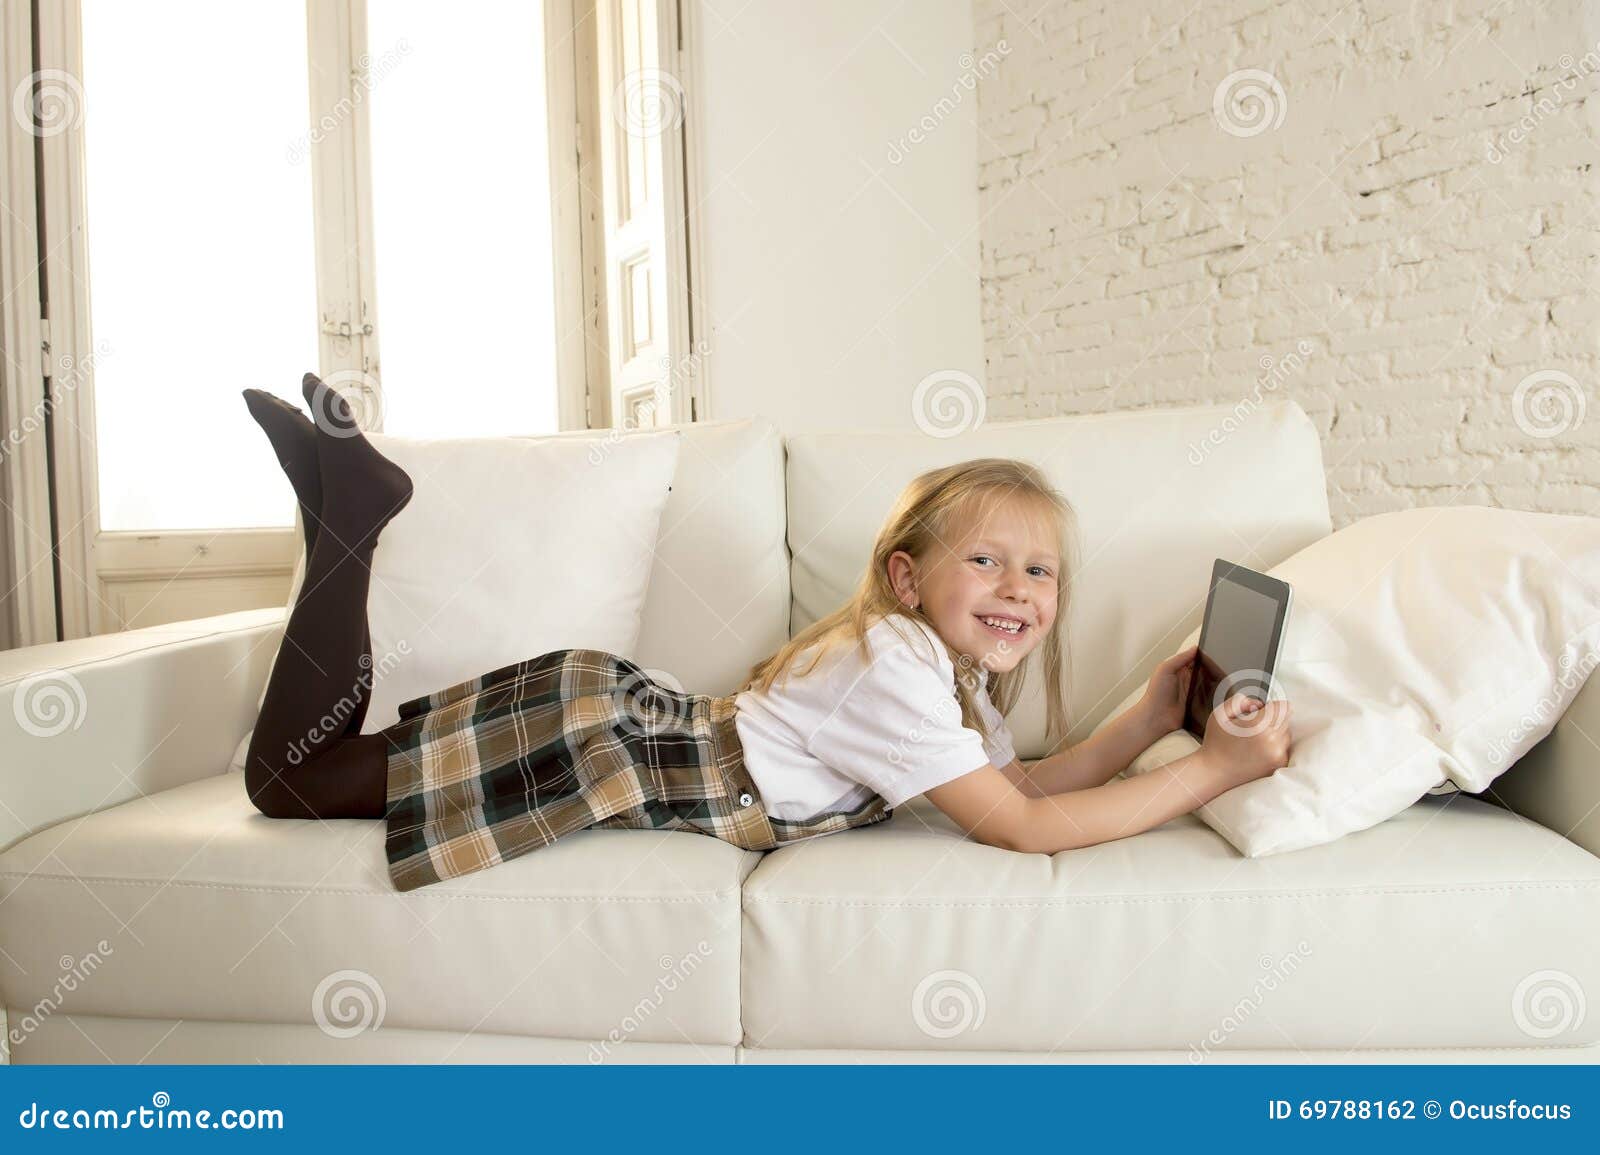 blond little girl lying on home sofa couch using internet app on digital tablet pad on digital tablet pad